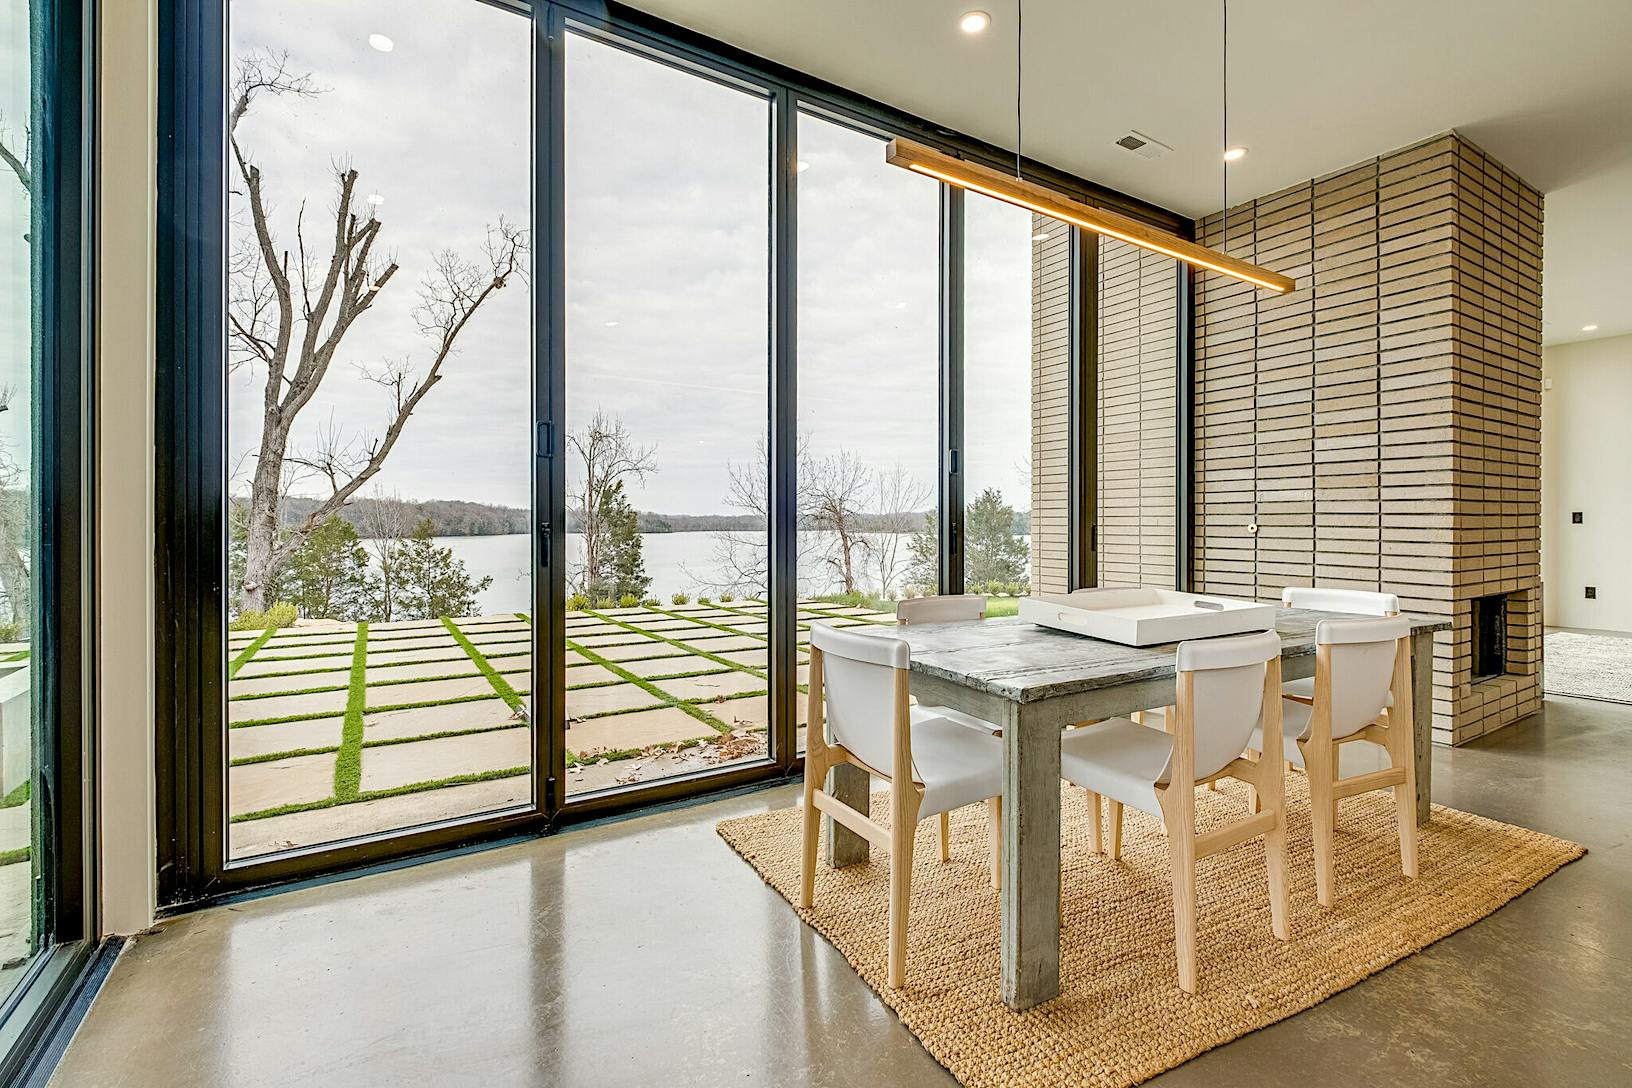 A modern dining area adjacent to floor-to-ceiling glass doors that offer a stunning view of the lake and trees.